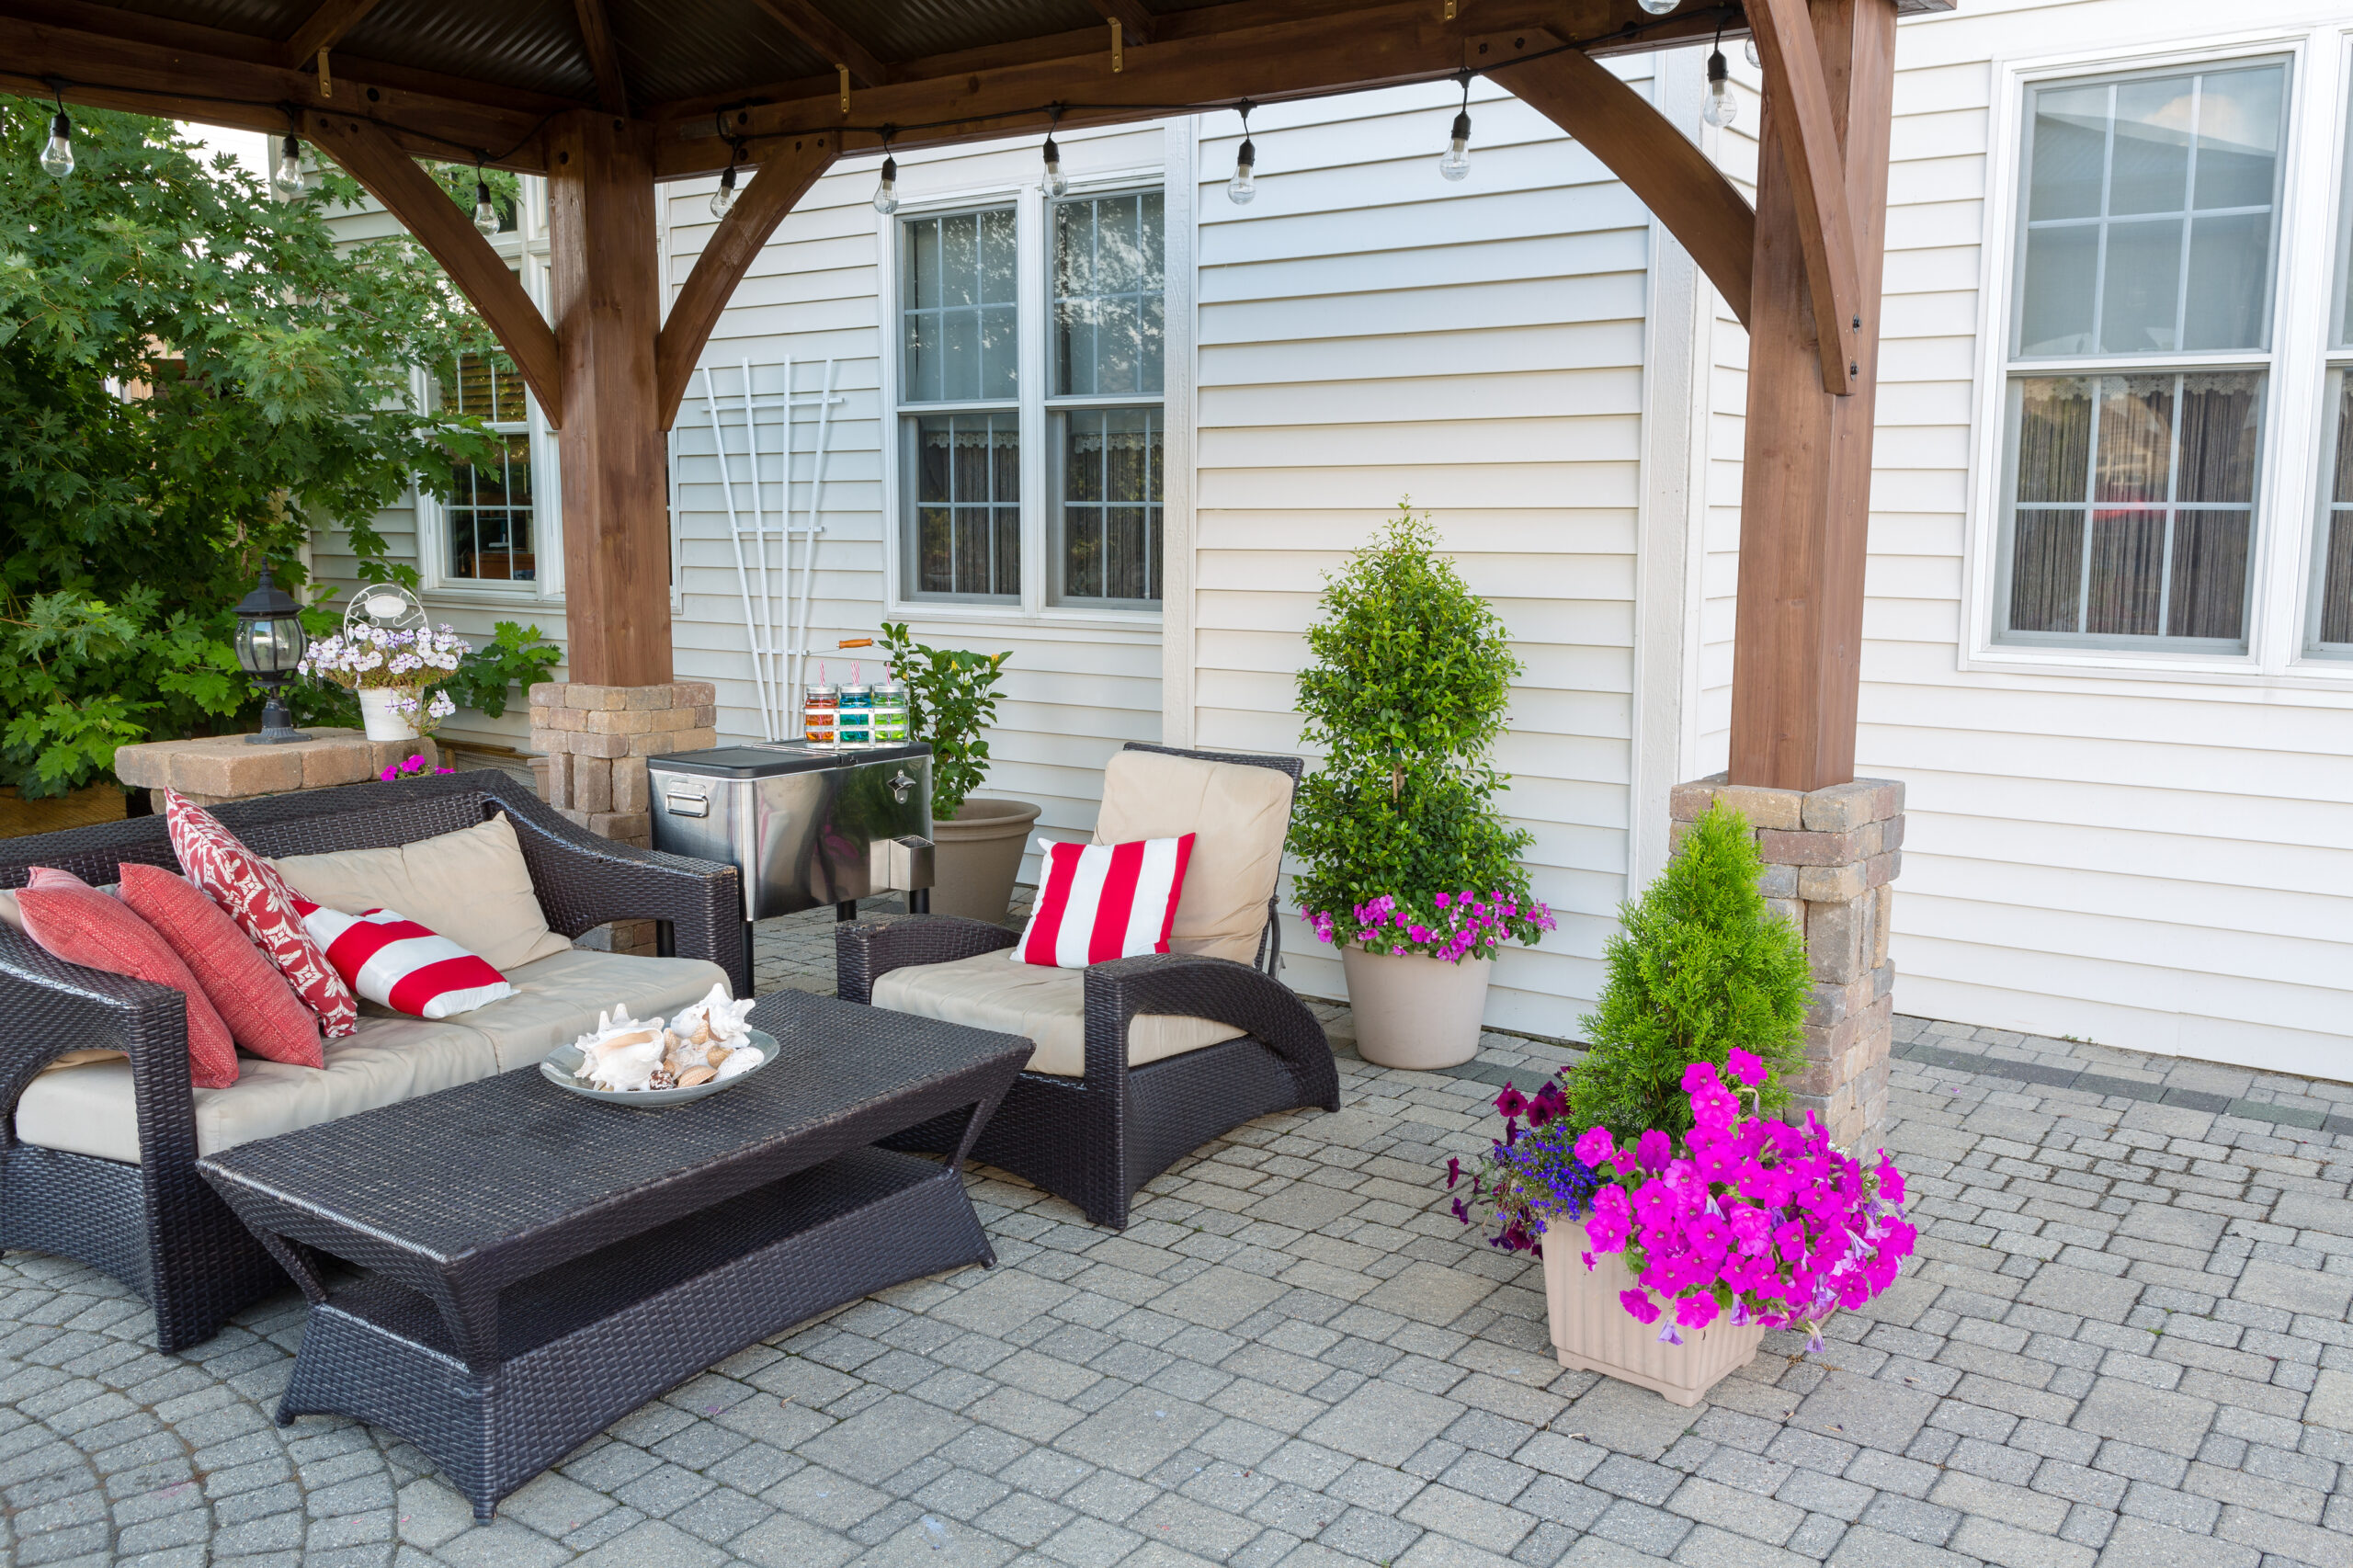 Patio Decorating Ideas for Spring